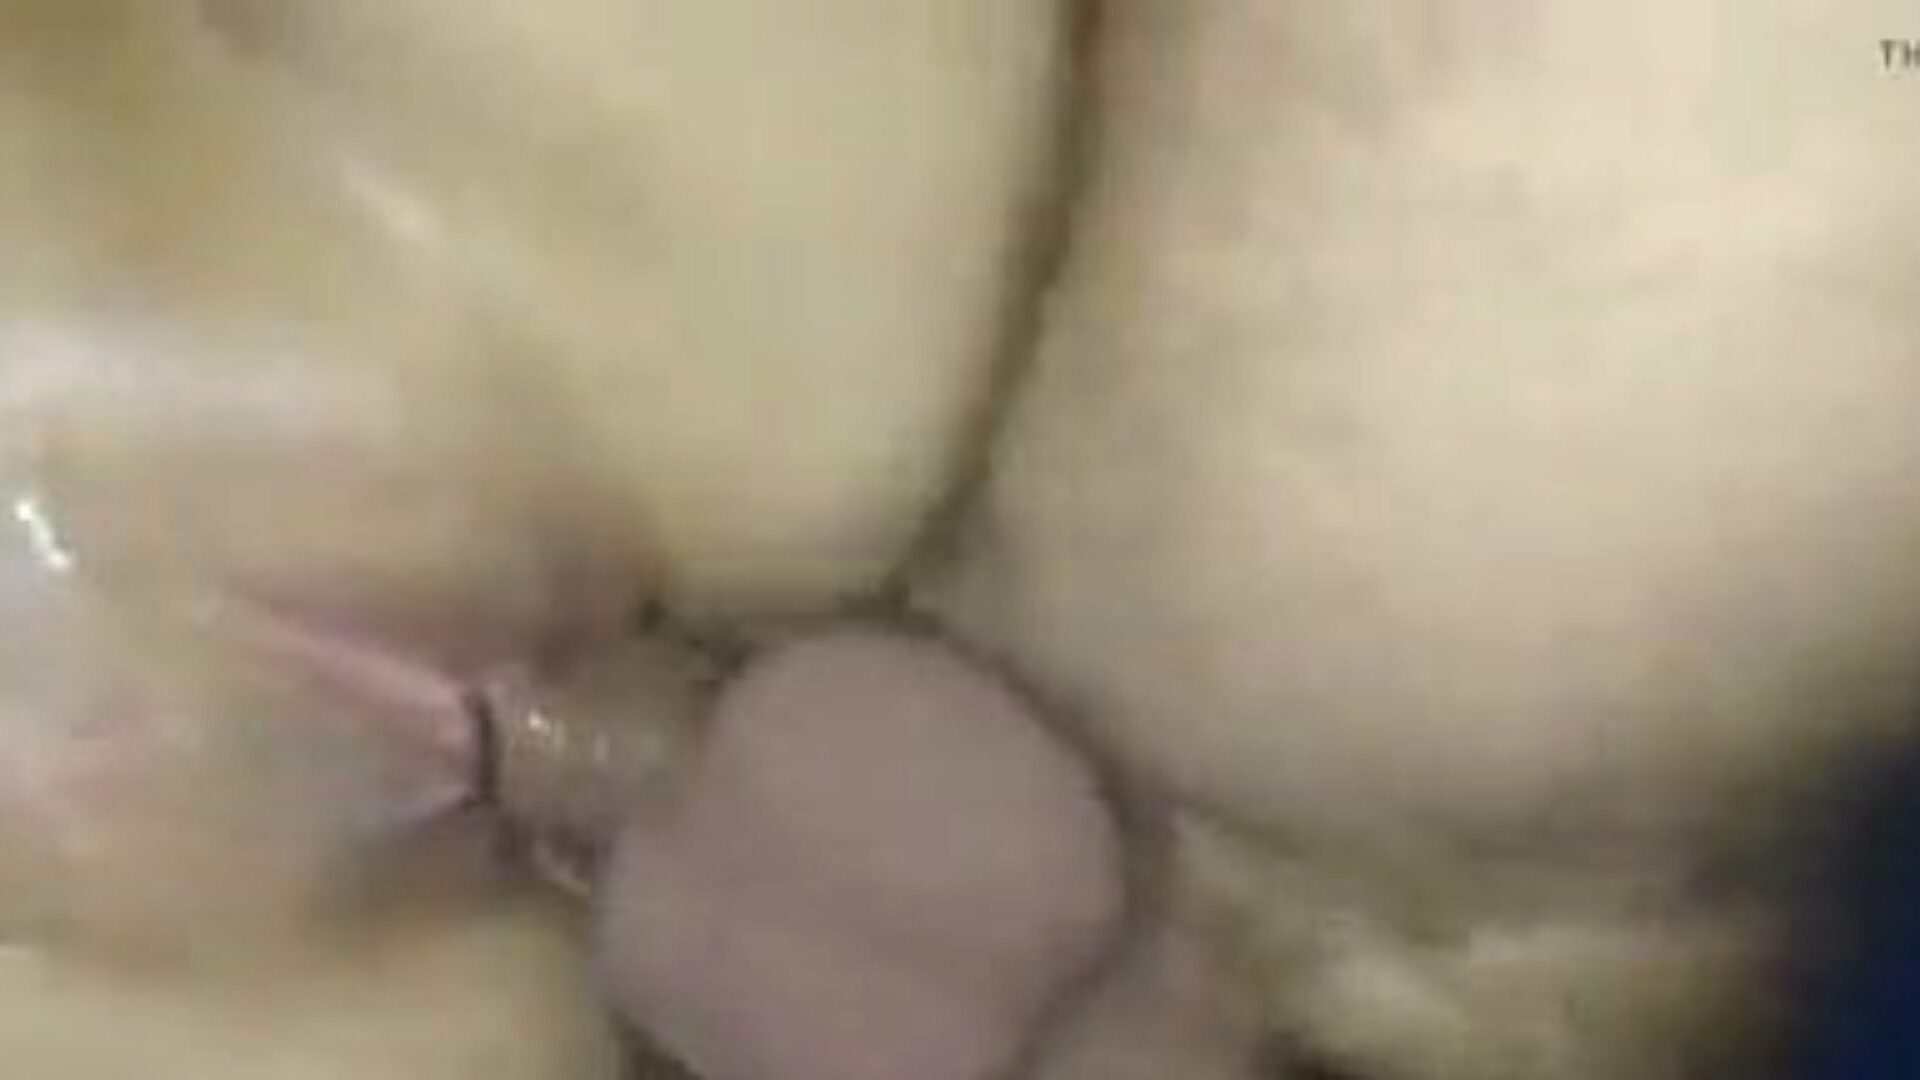 Meine Feuchte Muschi: Free Pussy Porn Video 38 - xHamster Watch Meine Feuchte Muschi tube intercourse clip for free on xHamster, with the sexiest bevy of German Pussy, Orgasm & Mature porn movie scene episodes